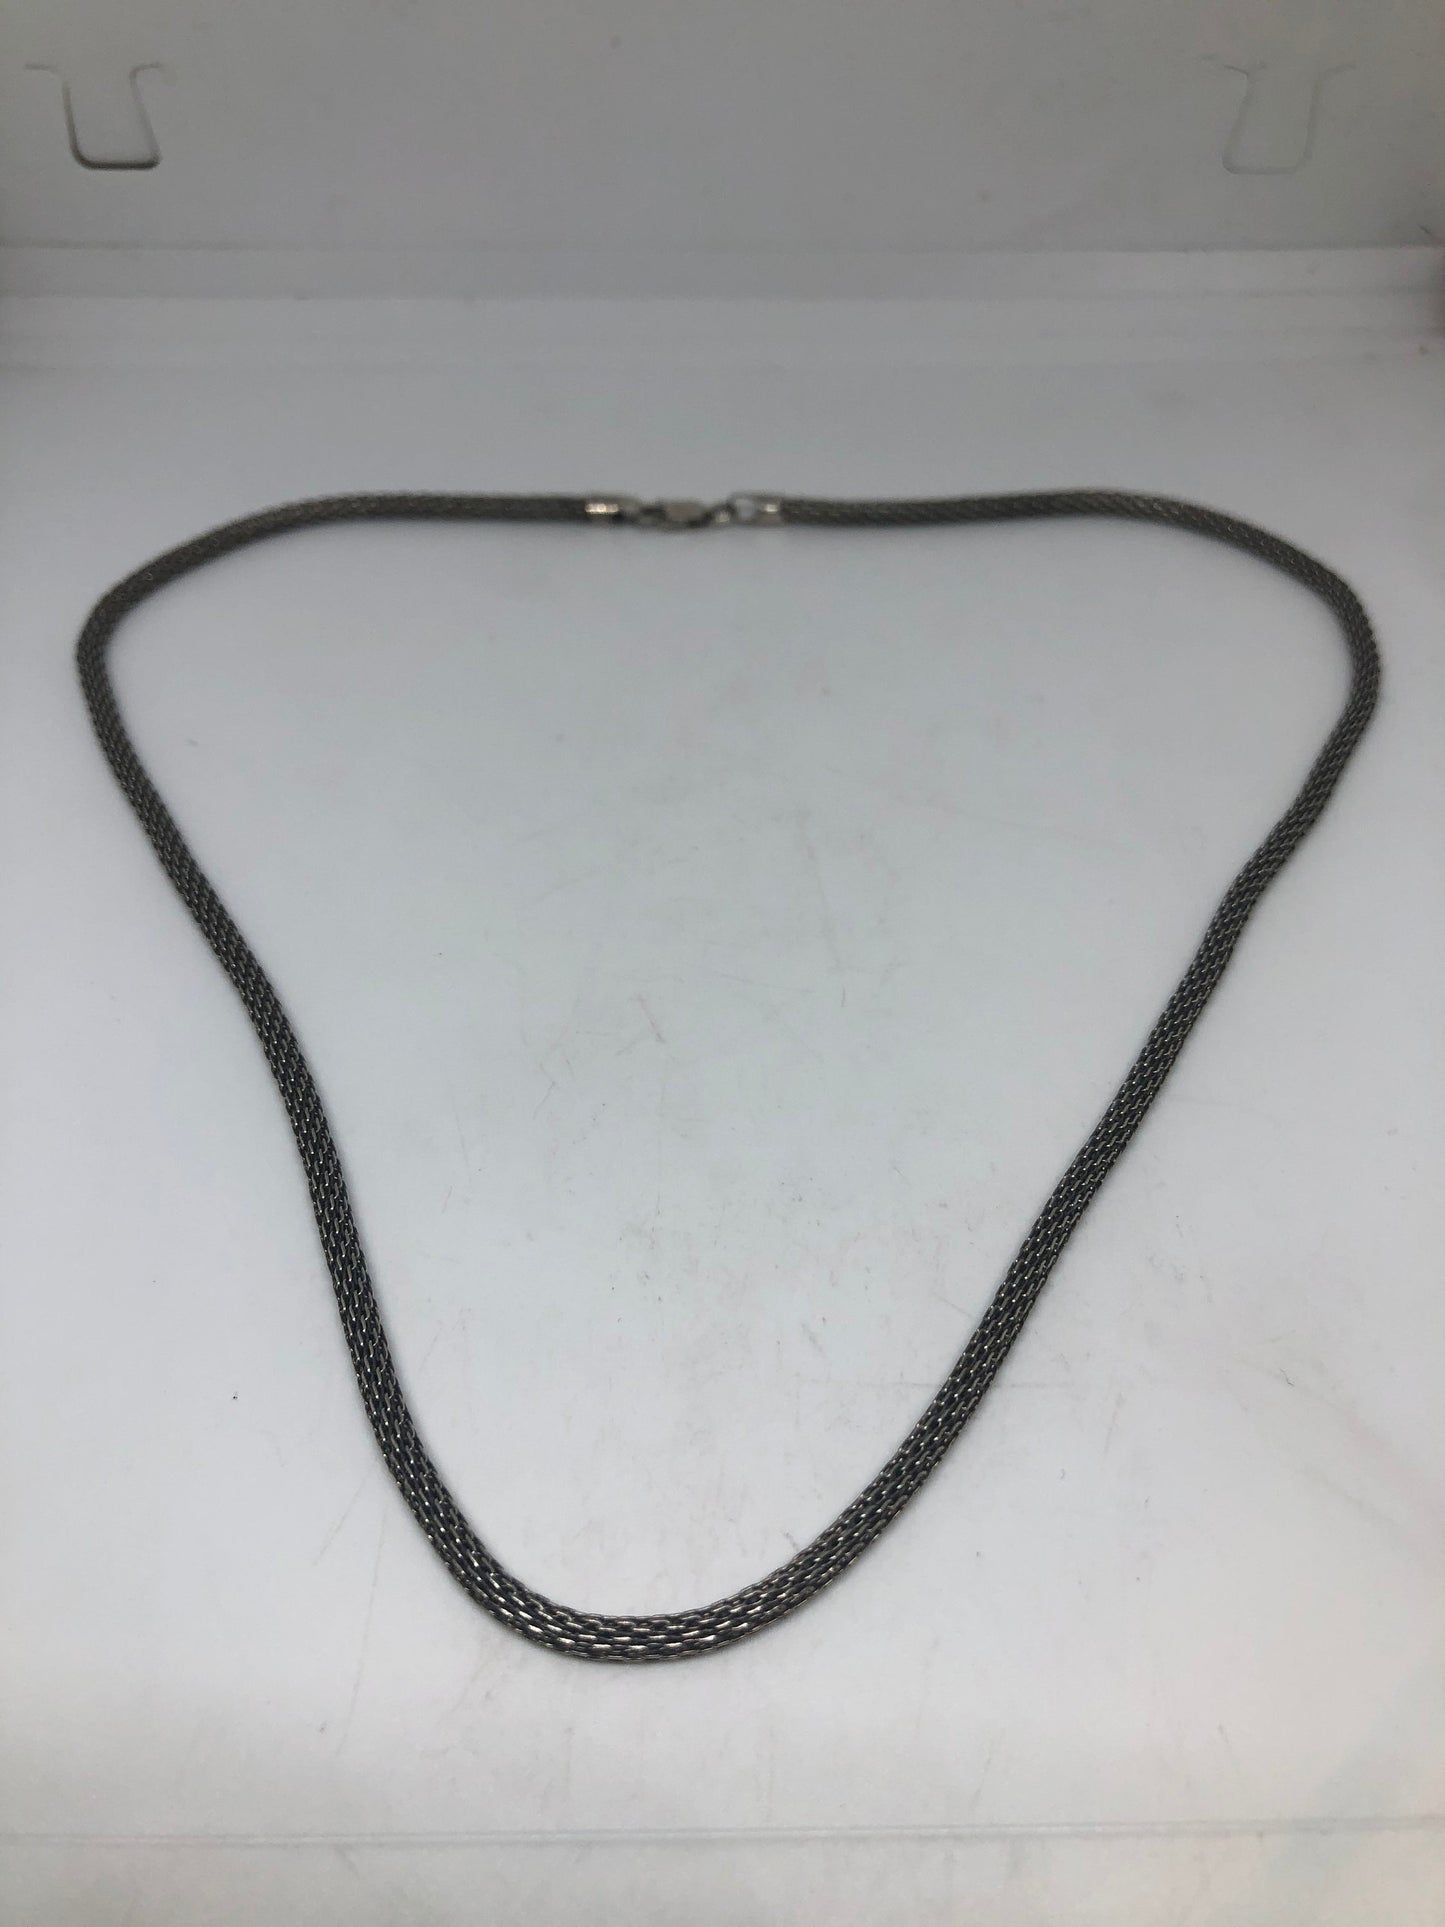 Vintage Black chain 18 inch 925 Sterling Silver necklace